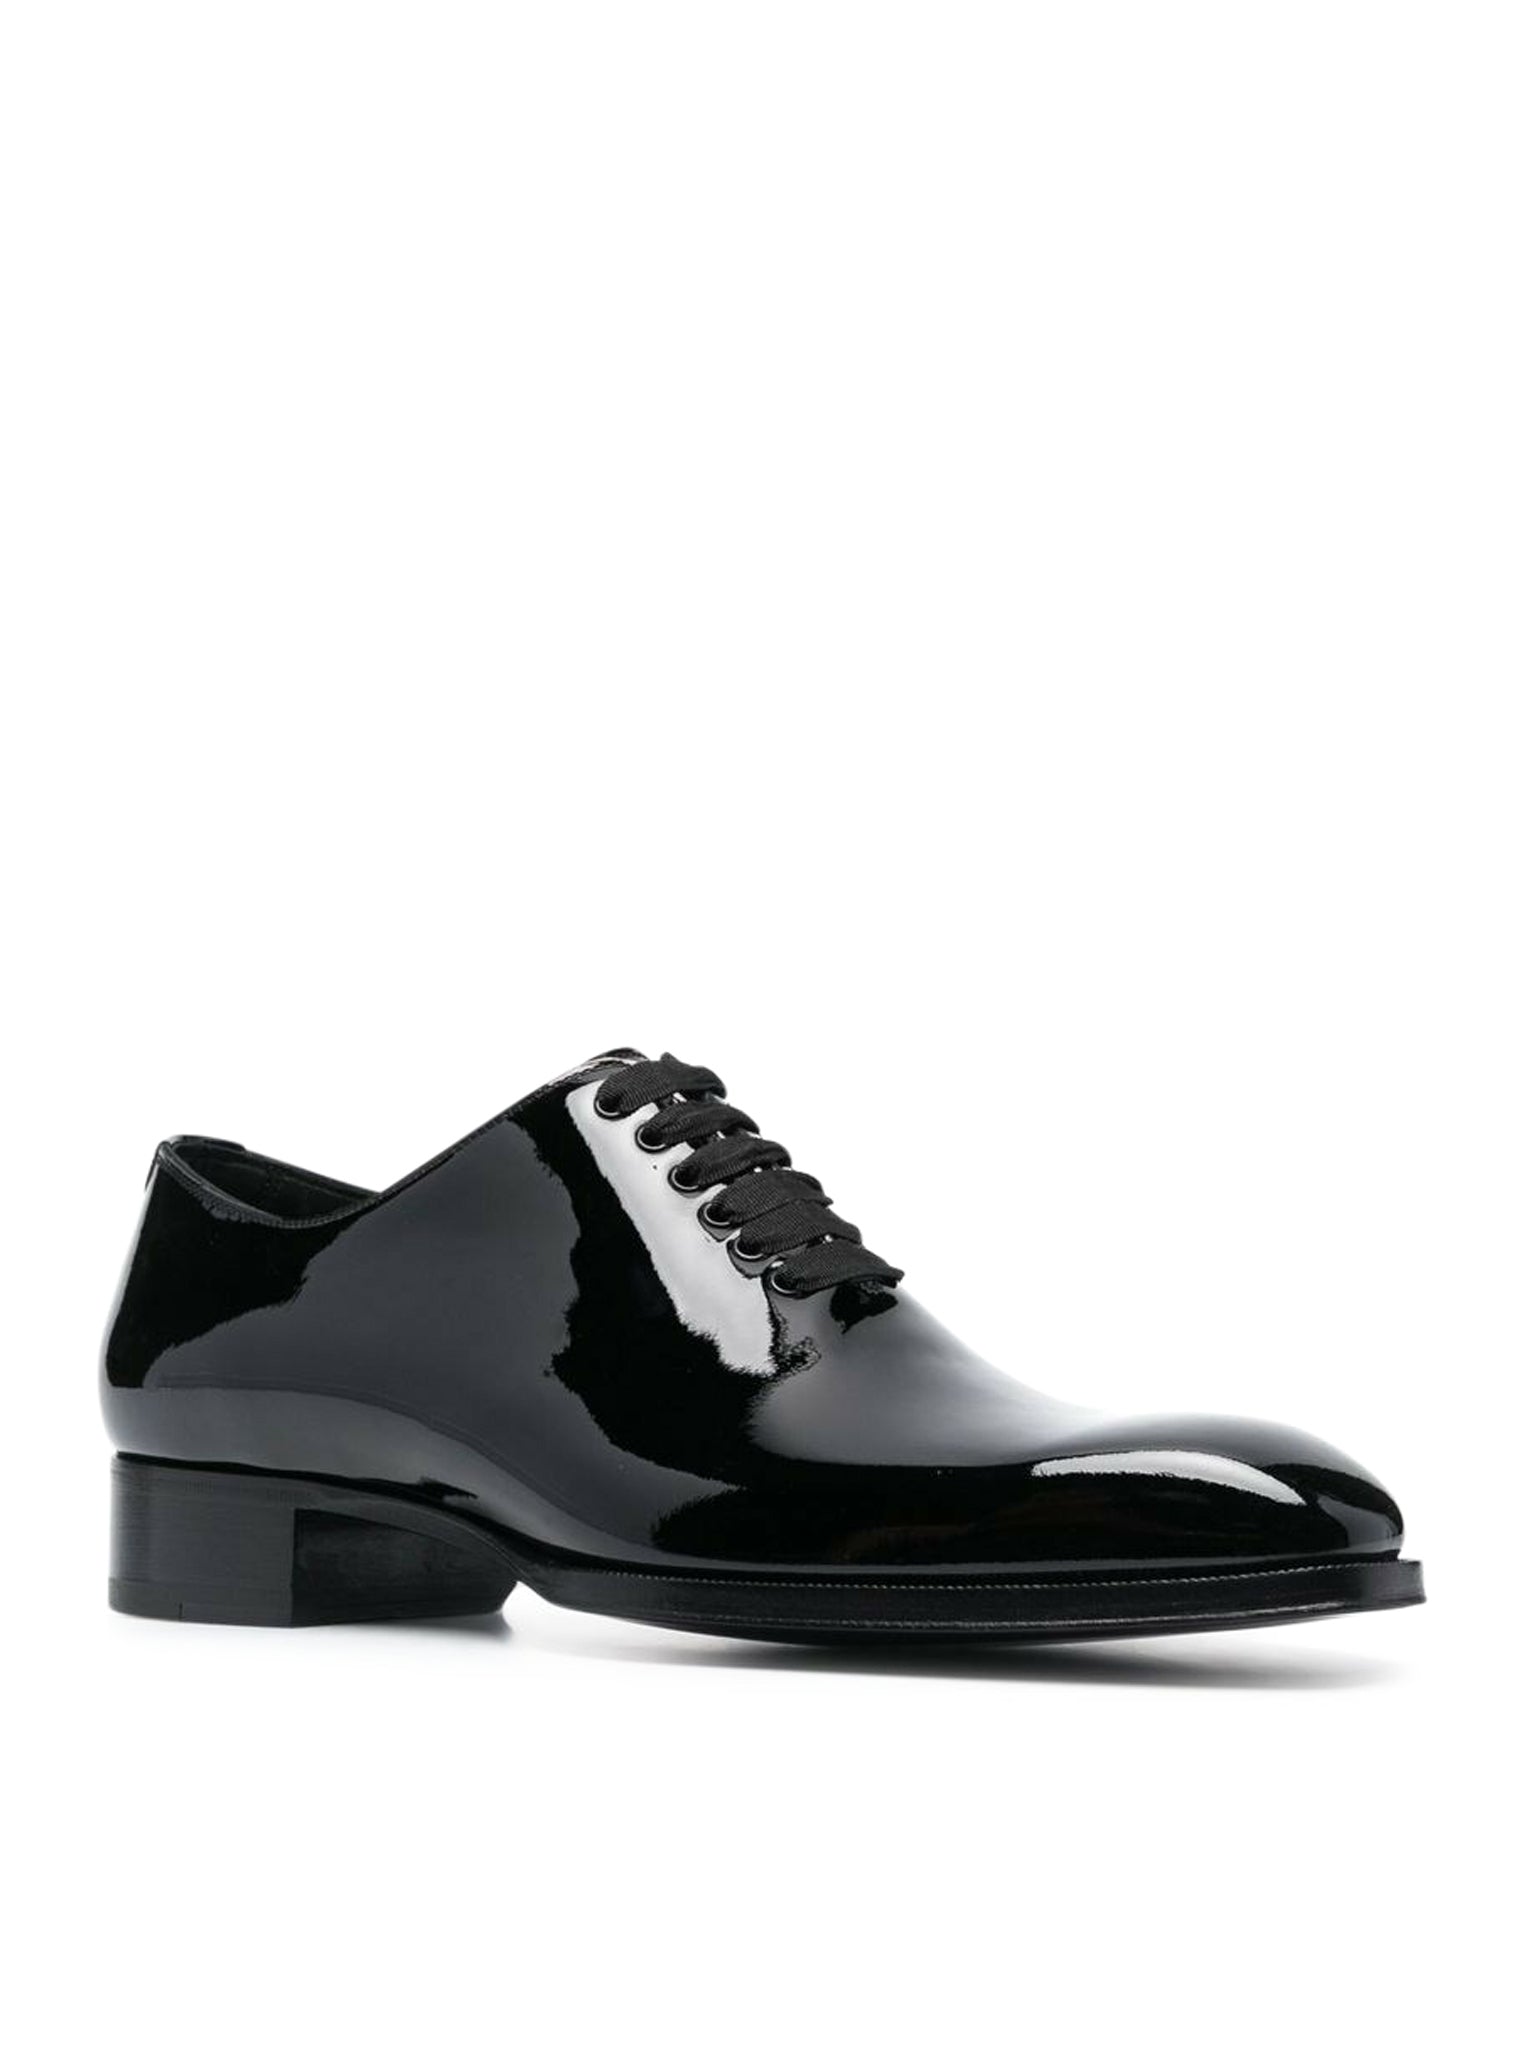 patent-finish oxford shoes